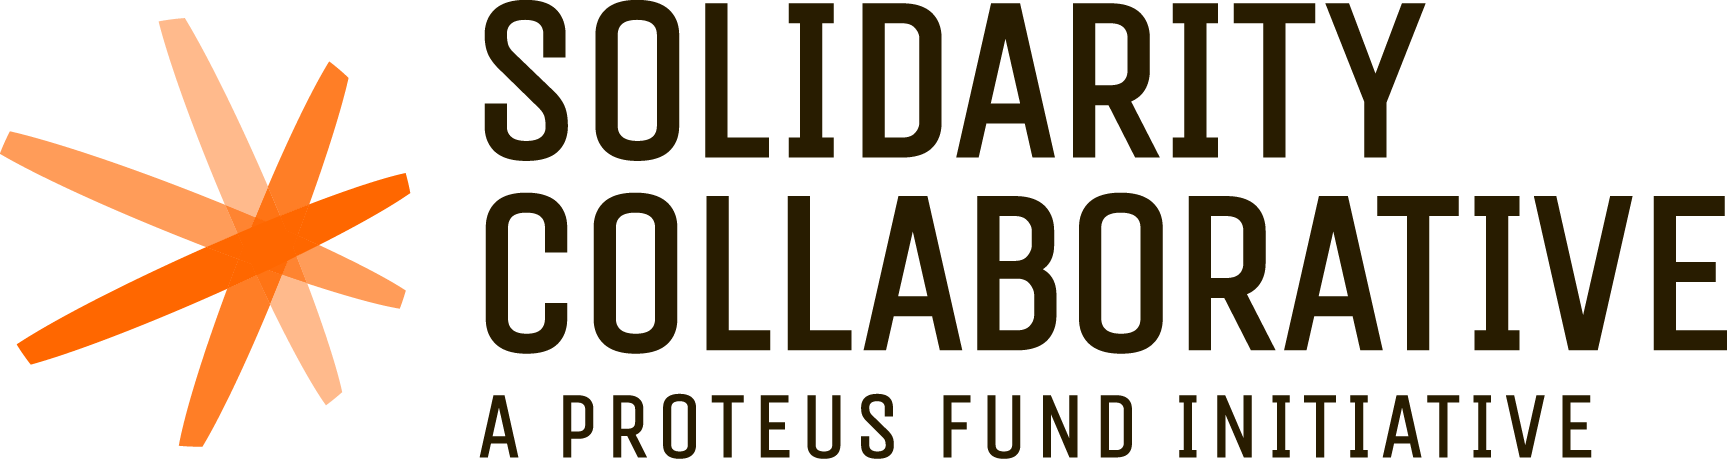 Proteus Fund Launches the Solidarity Collaborative - Proteus Fund